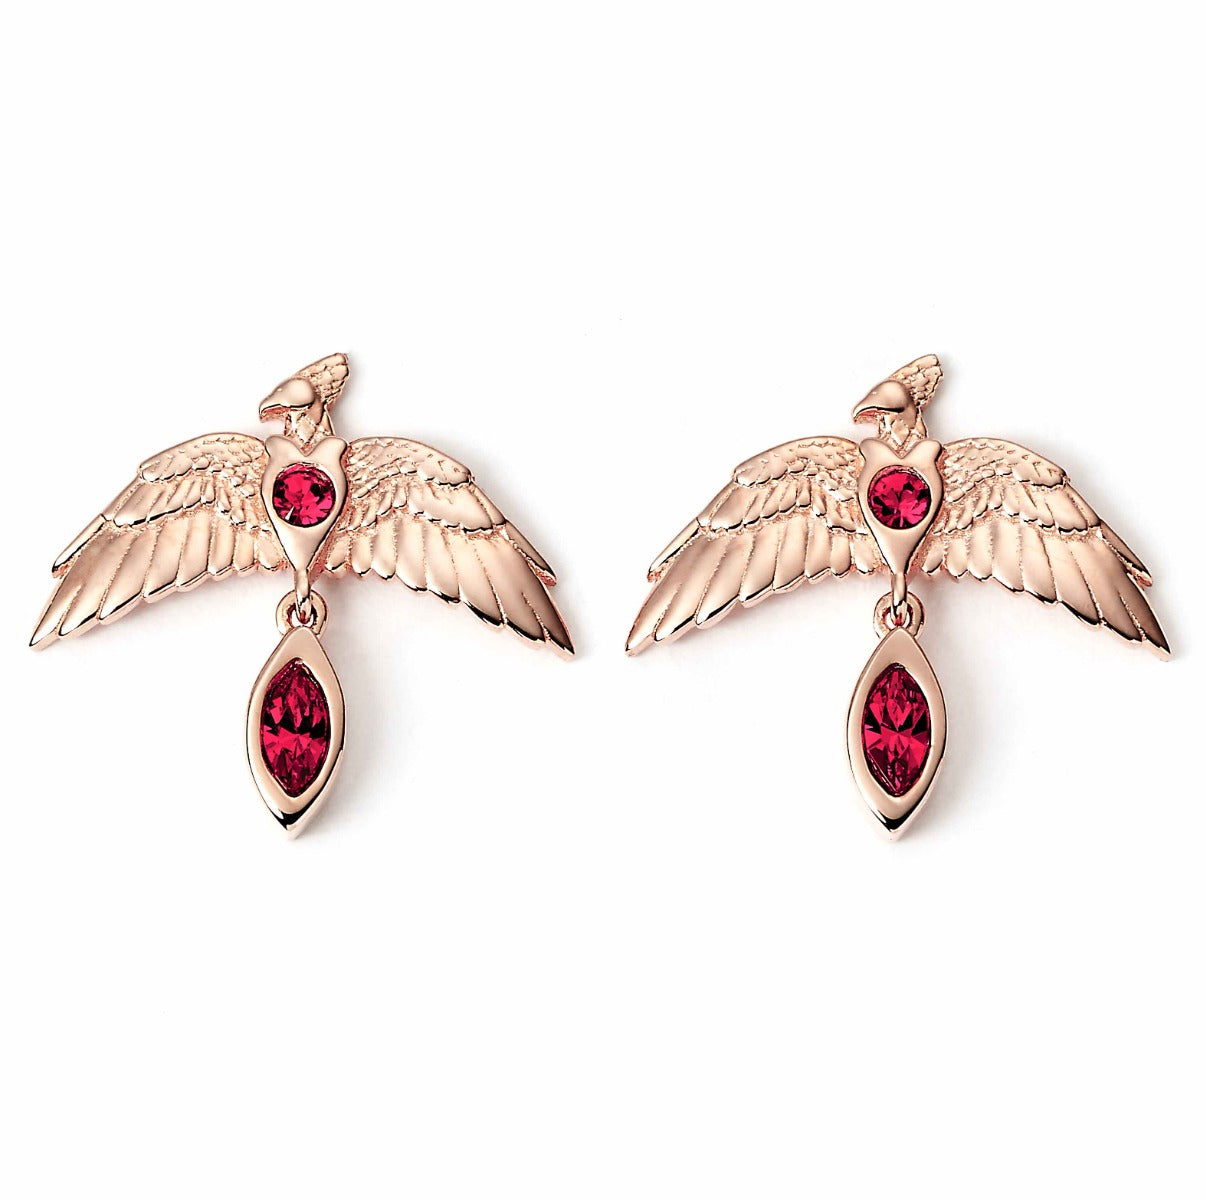 Harry Potter Sterling Silver Rose Gold Plated Fawkes Earrings with Crystals - Rose Gold Plated